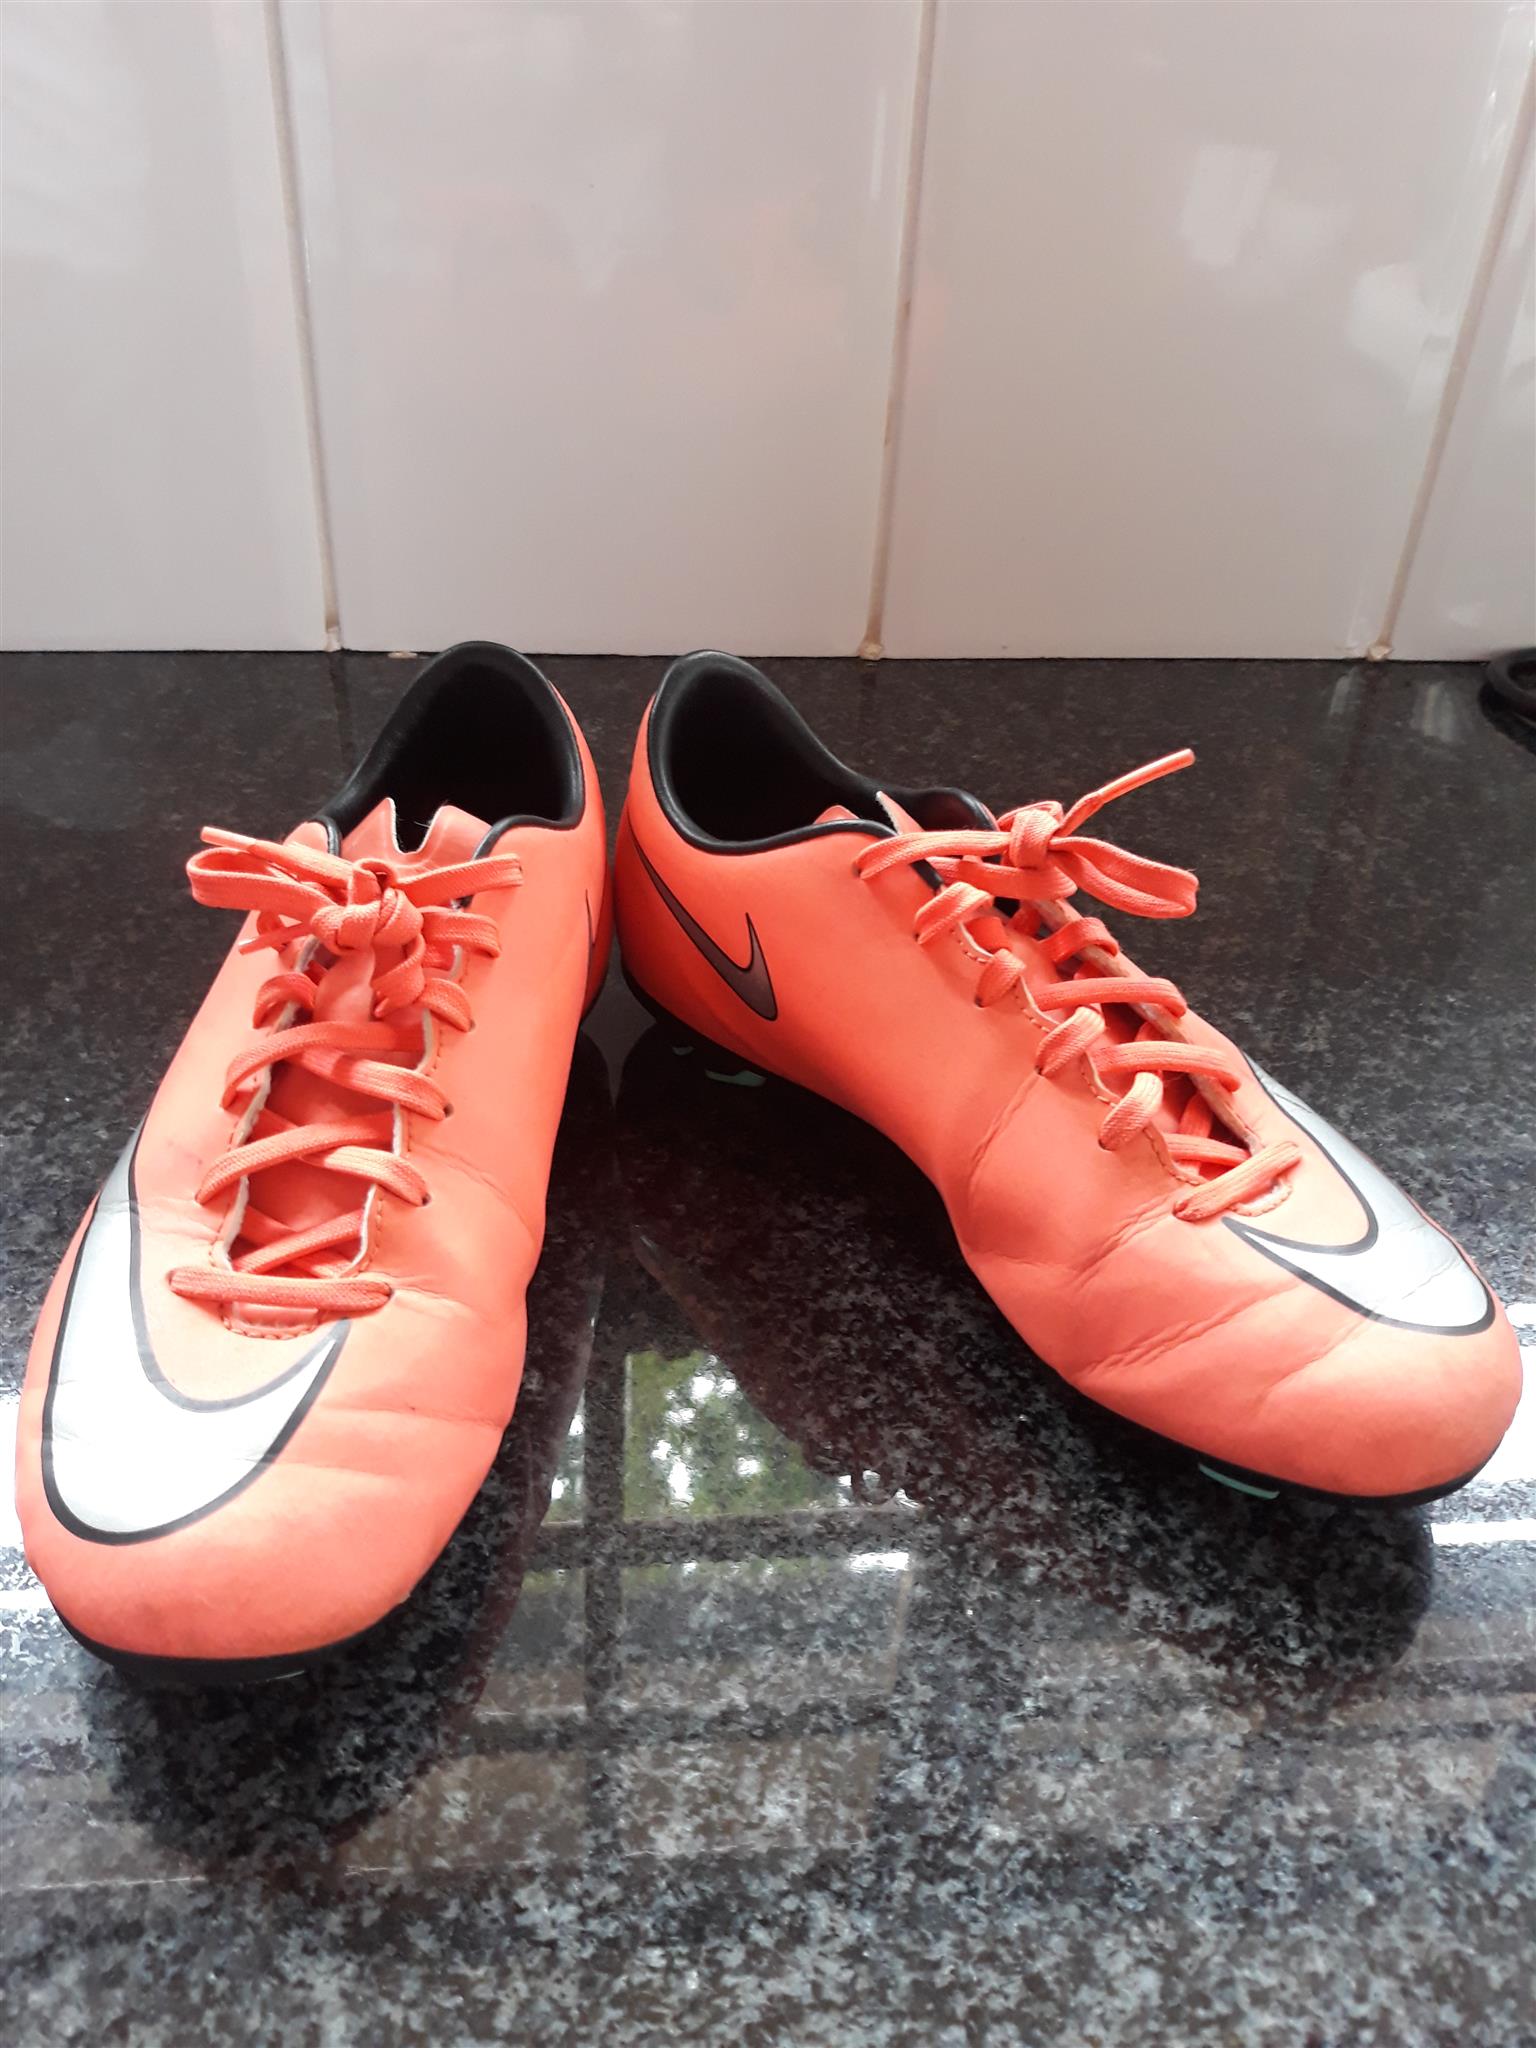 Nike Mercurial Soccer Boots | Junk Mail